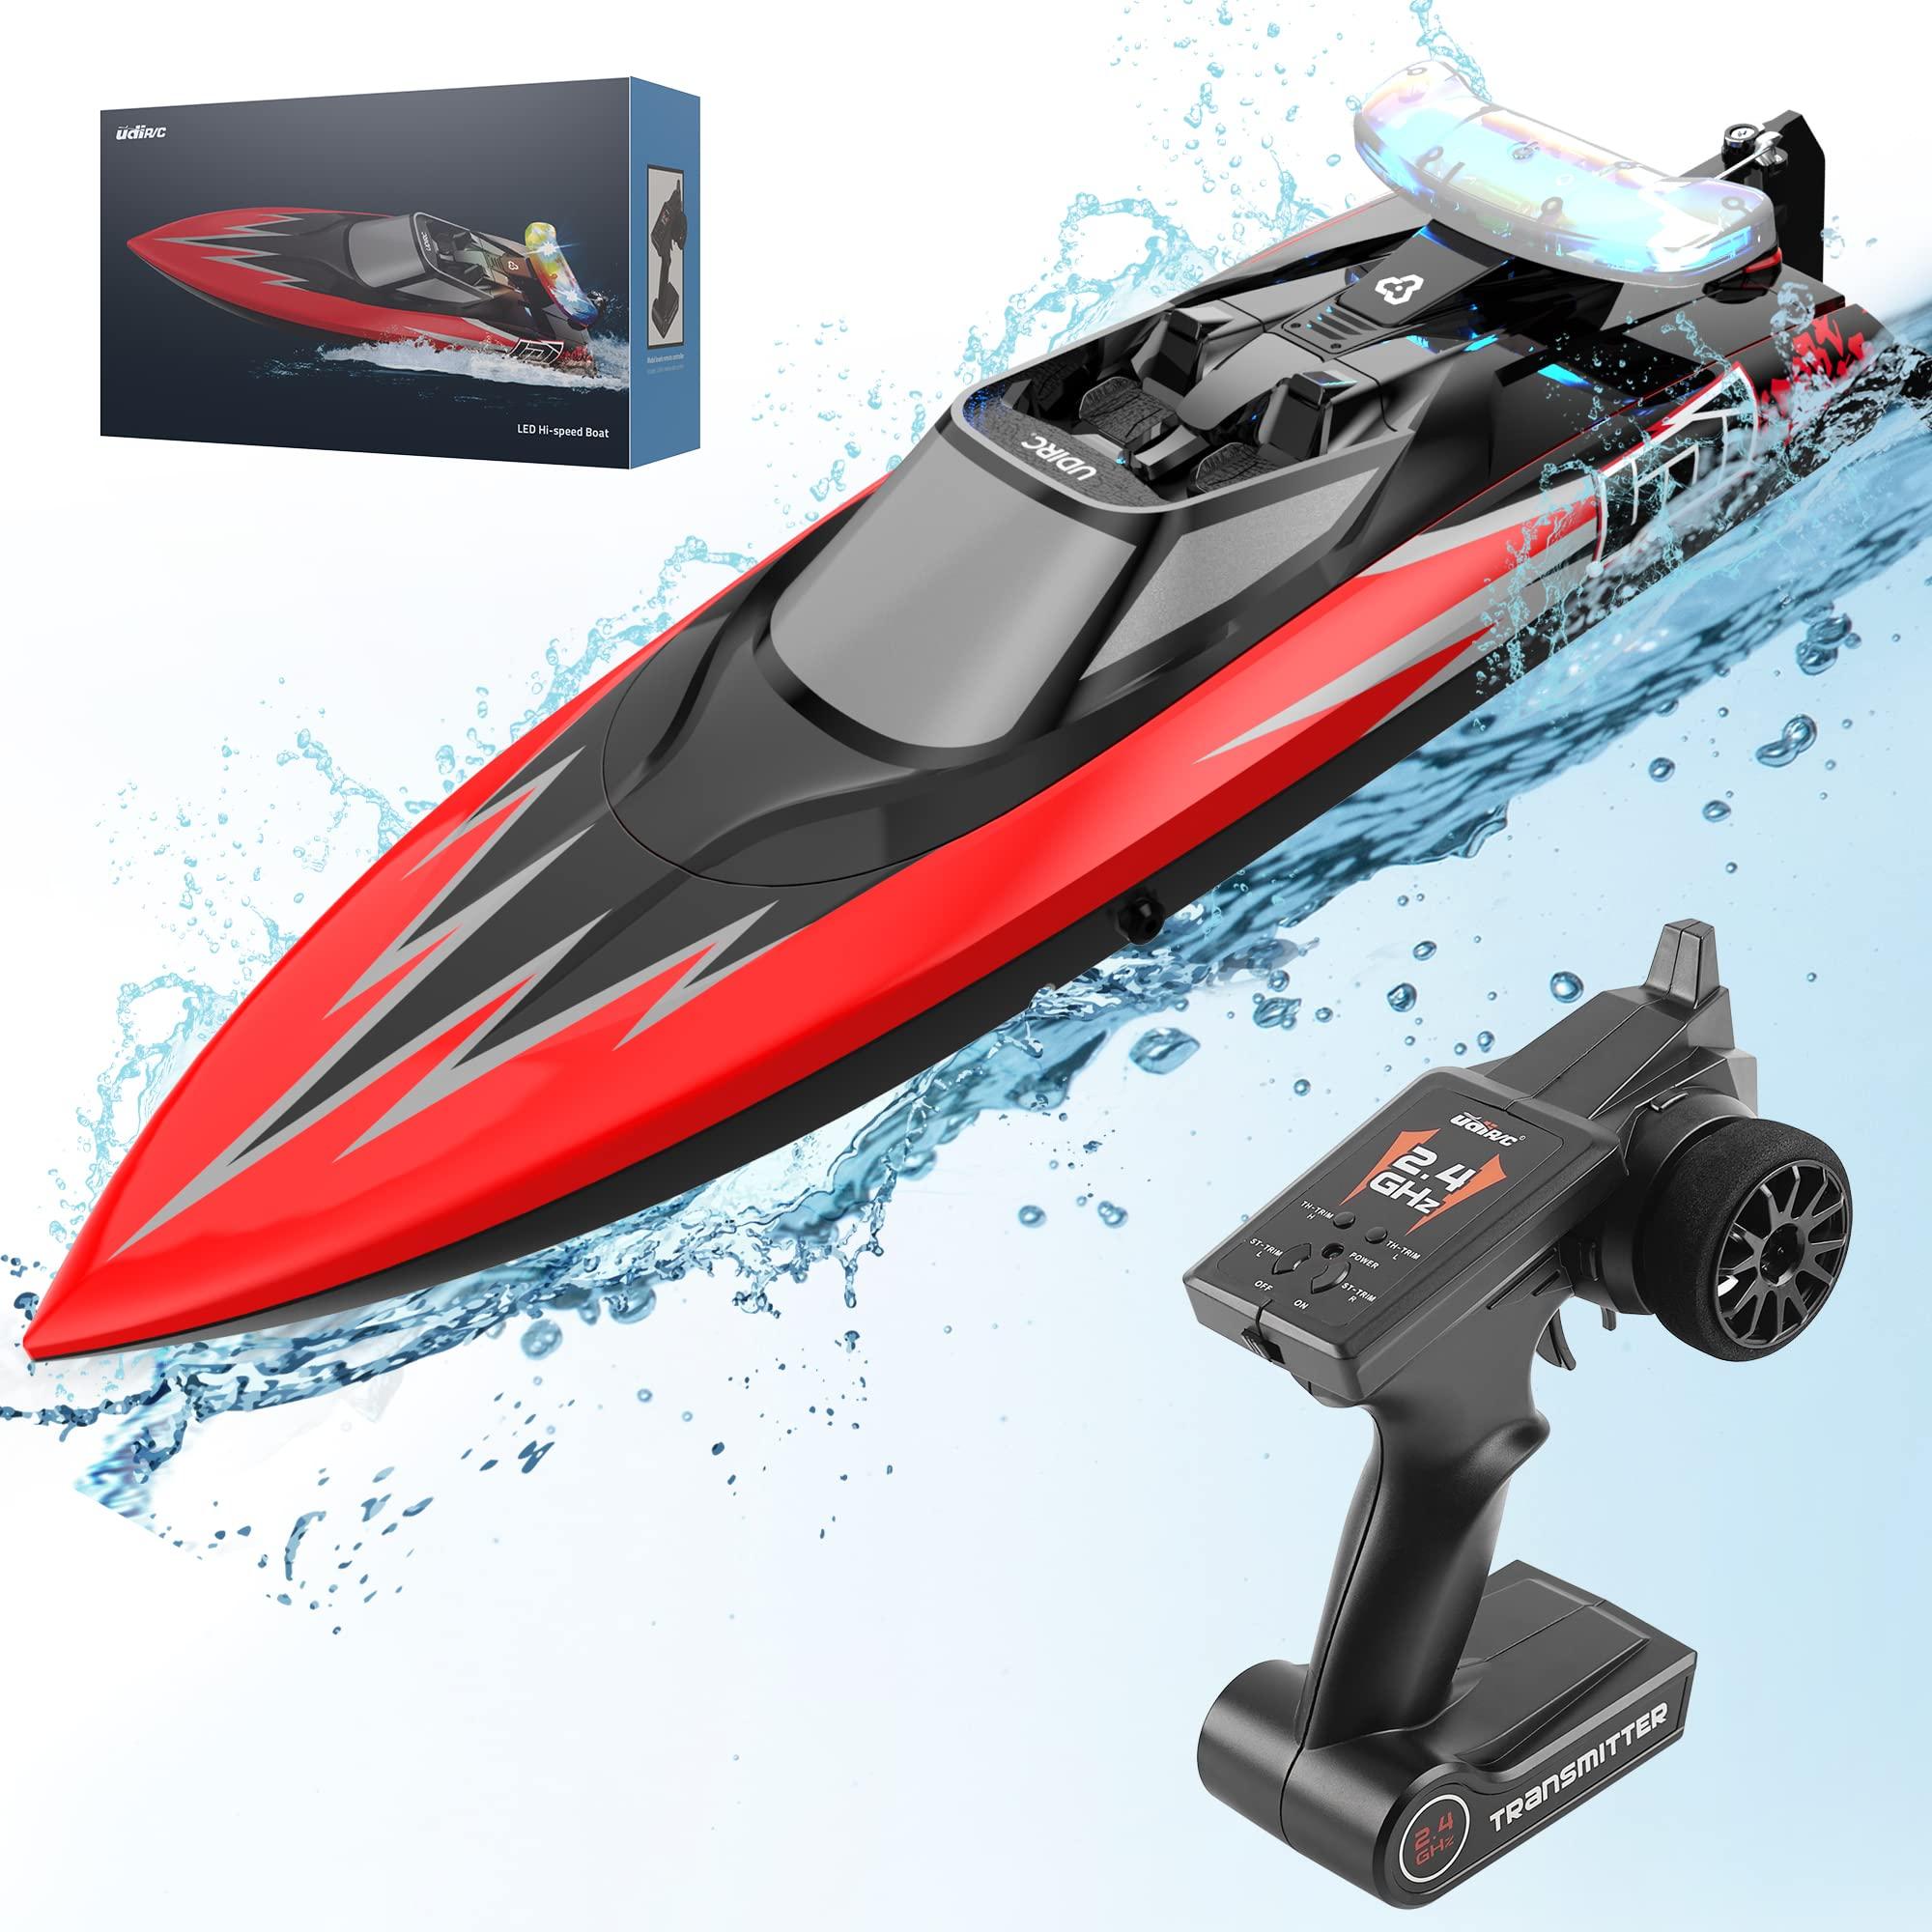 Large Rc Speed Boat: Operating a Large RC Speed Boat: Safety Tips